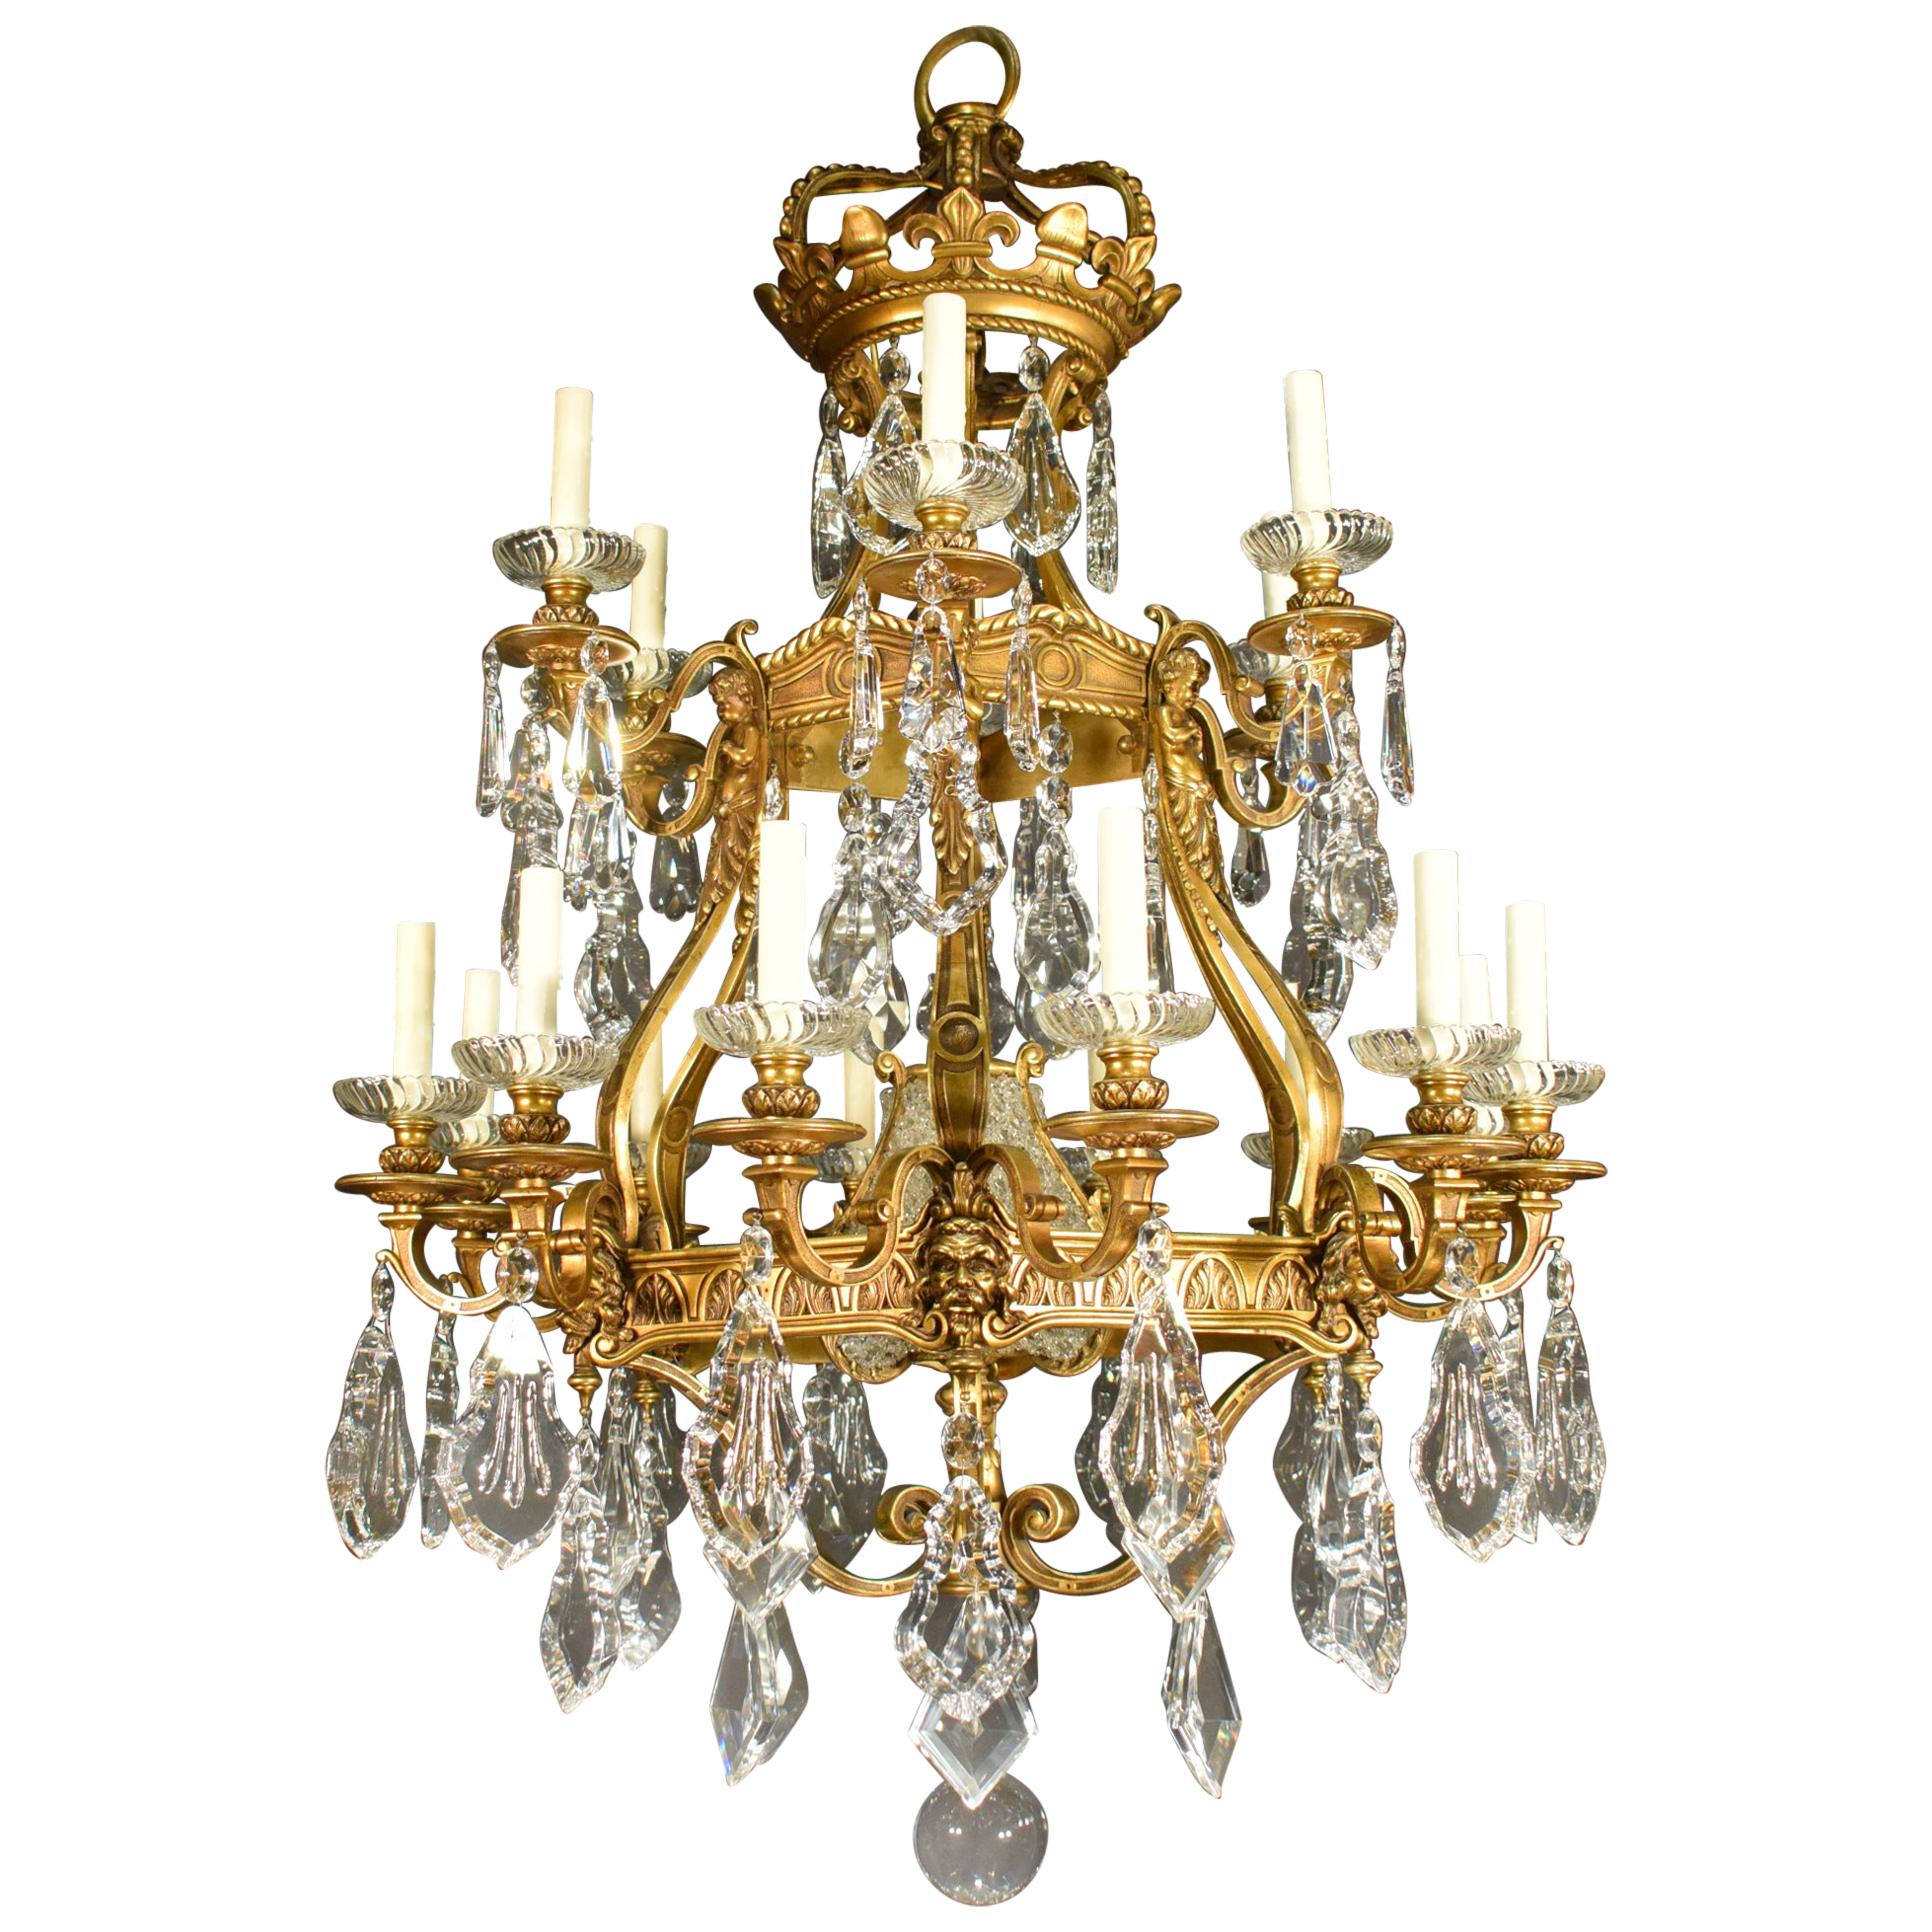 Magnificent Gilt Bronze and Crystal Chandelier